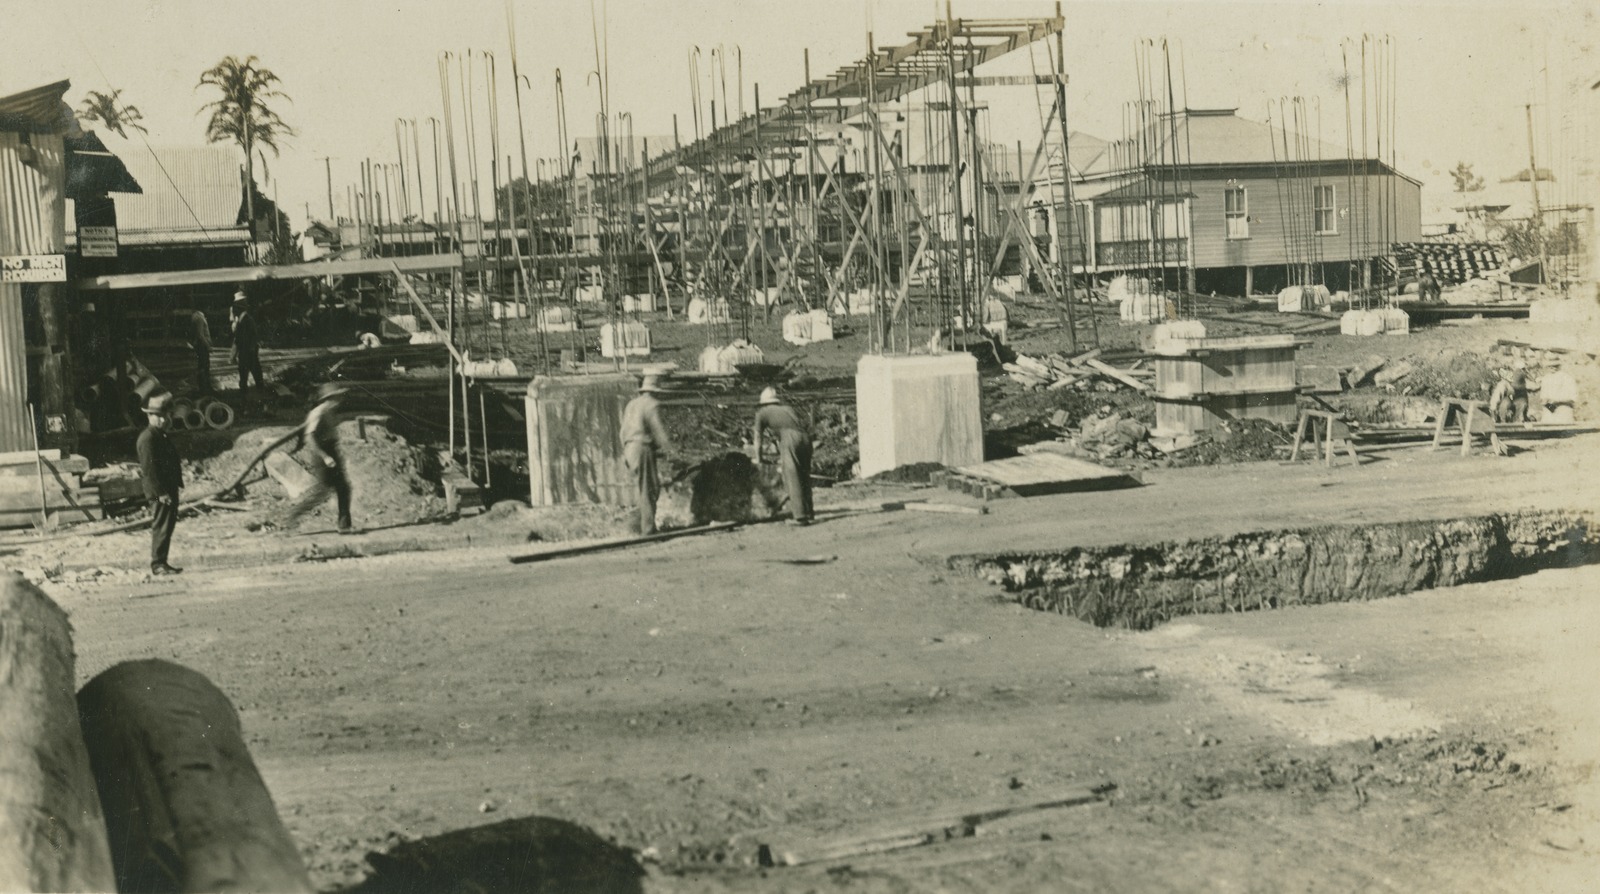 A construction site for the Montague Road end of the William Jolly Bridge. You can see houses in the background of the construction.